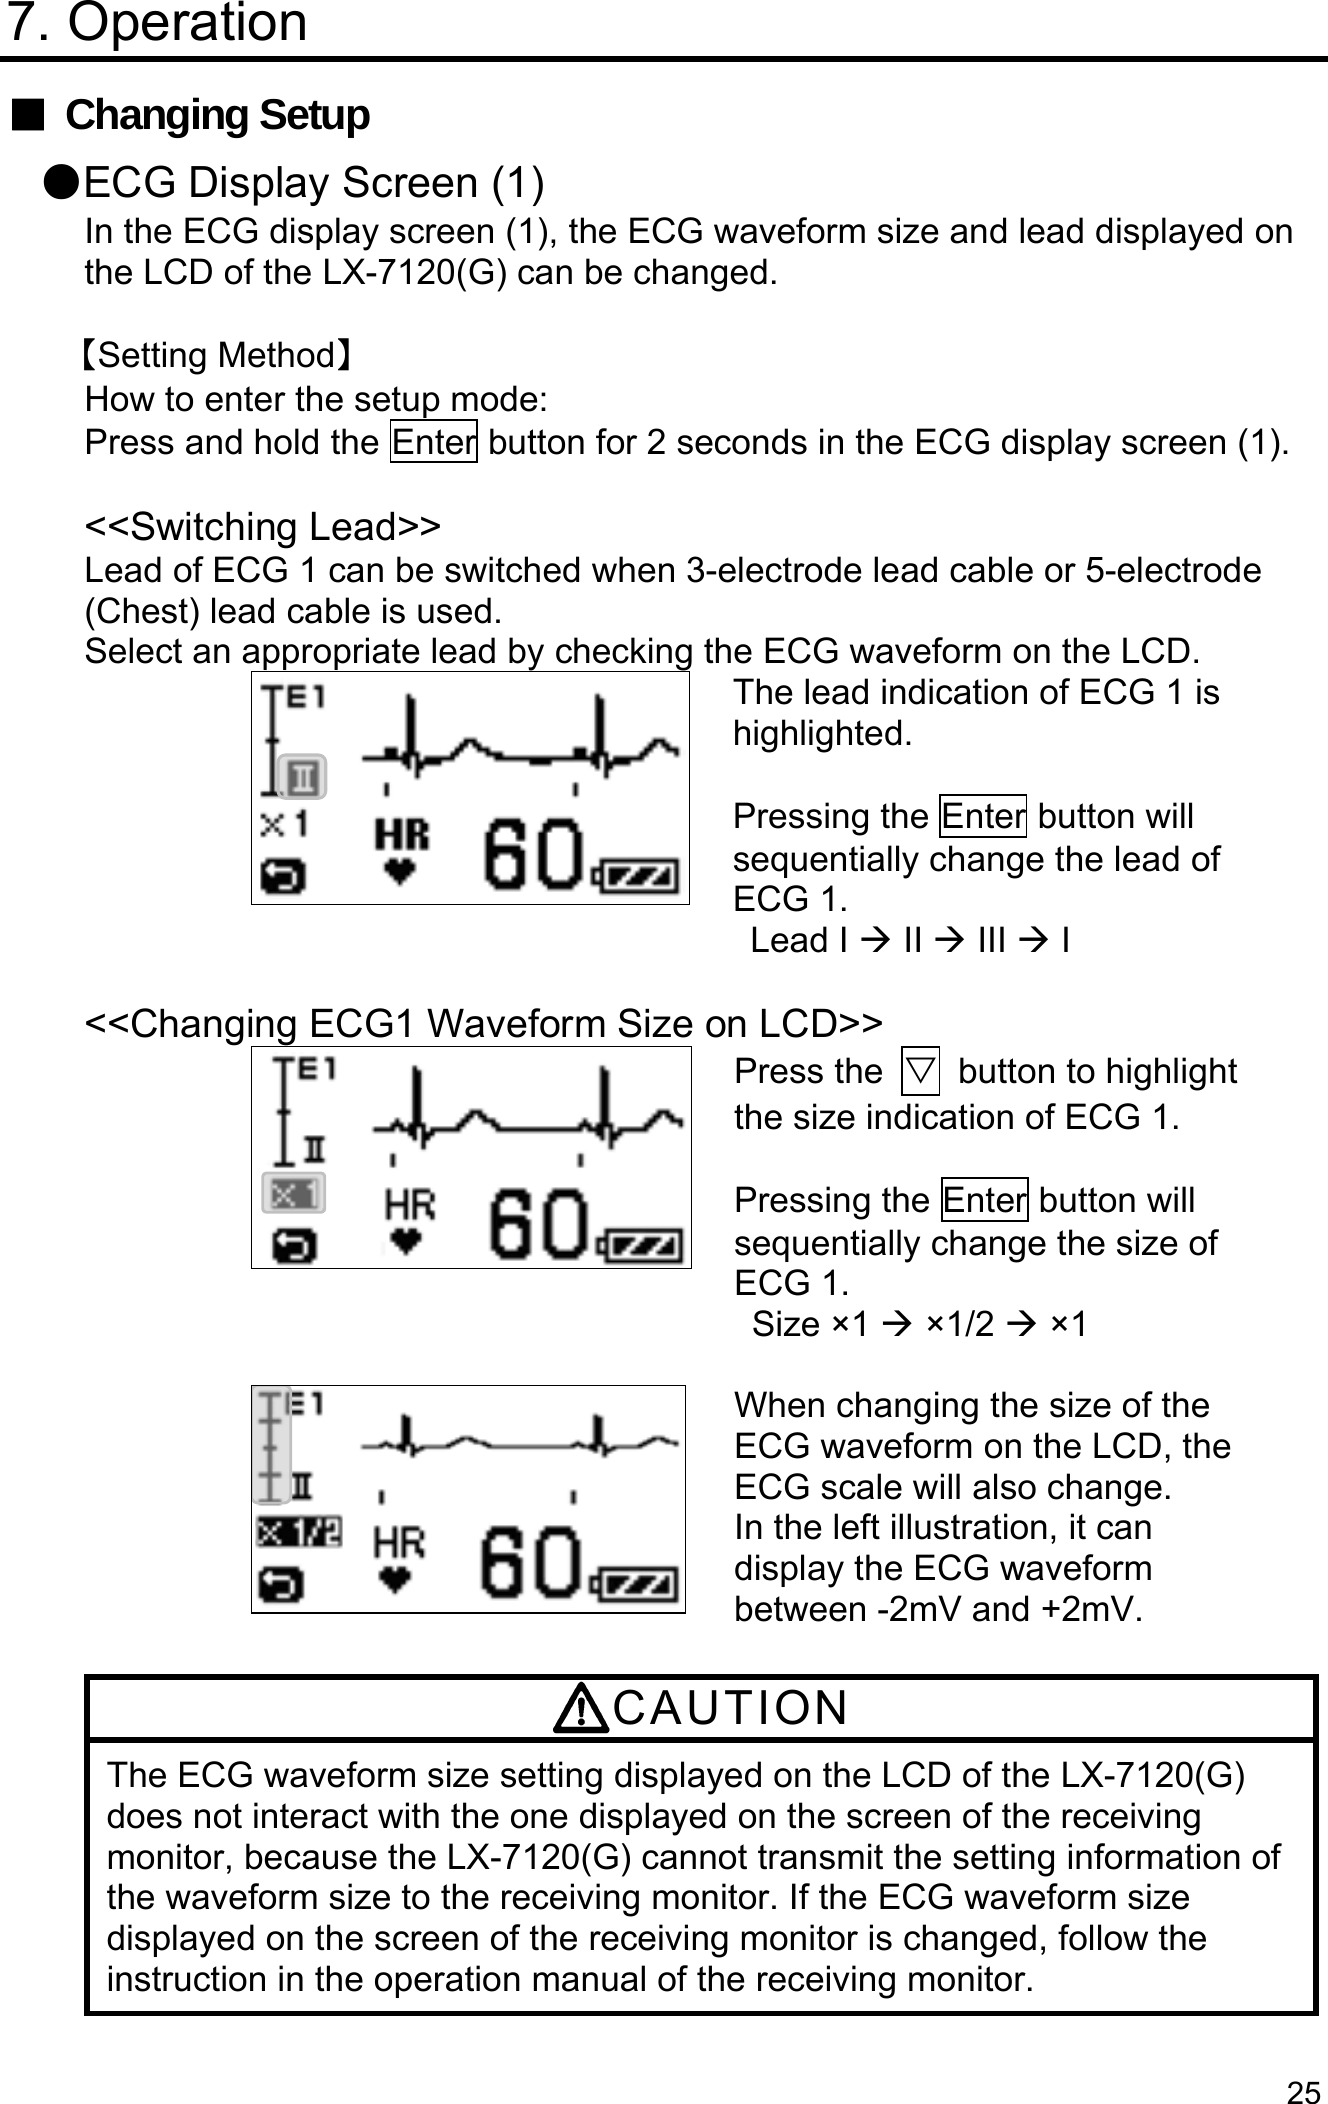  25 7. Operation ■ Changing Setup ●ECG Display Screen (1) In the ECG display screen (1), the ECG waveform size and lead displayed on the LCD of the LX-7120(G) can be changed.  【Setting Method】 How to enter the setup mode: Press and hold the Enter button for 2 seconds in the ECG display screen (1).  &lt;&lt;Switching Lead&gt;&gt; Lead of ECG 1 can be switched when 3-electrode lead cable or 5-electrode (Chest) lead cable is used. Select an appropriate lead by checking the ECG waveform on the LCD. The lead indication of ECG 1 is highlighted.  Pressing the Enter button will sequentially change the lead of ECG 1. Lead I  II  III  I  &lt;&lt;Changing ECG1 Waveform Size on LCD&gt;&gt; Press the  ▽  button to highlight the size indication of ECG 1.    Pressing the Enter button will sequentially change the size of ECG 1. Size ×1  ×1/2  ×1  When changing the size of the ECG waveform on the LCD, the ECG scale will also change. In the left illustration, it can display the ECG waveform between -2mV and +2mV.  CAUTION The ECG waveform size setting displayed on the LCD of the LX-7120(G) does not interact with the one displayed on the screen of the receiving monitor, because the LX-7120(G) cannot transmit the setting information of the waveform size to the receiving monitor. If the ECG waveform size displayed on the screen of the receiving monitor is changed, follow the instruction in the operation manual of the receiving monitor.  